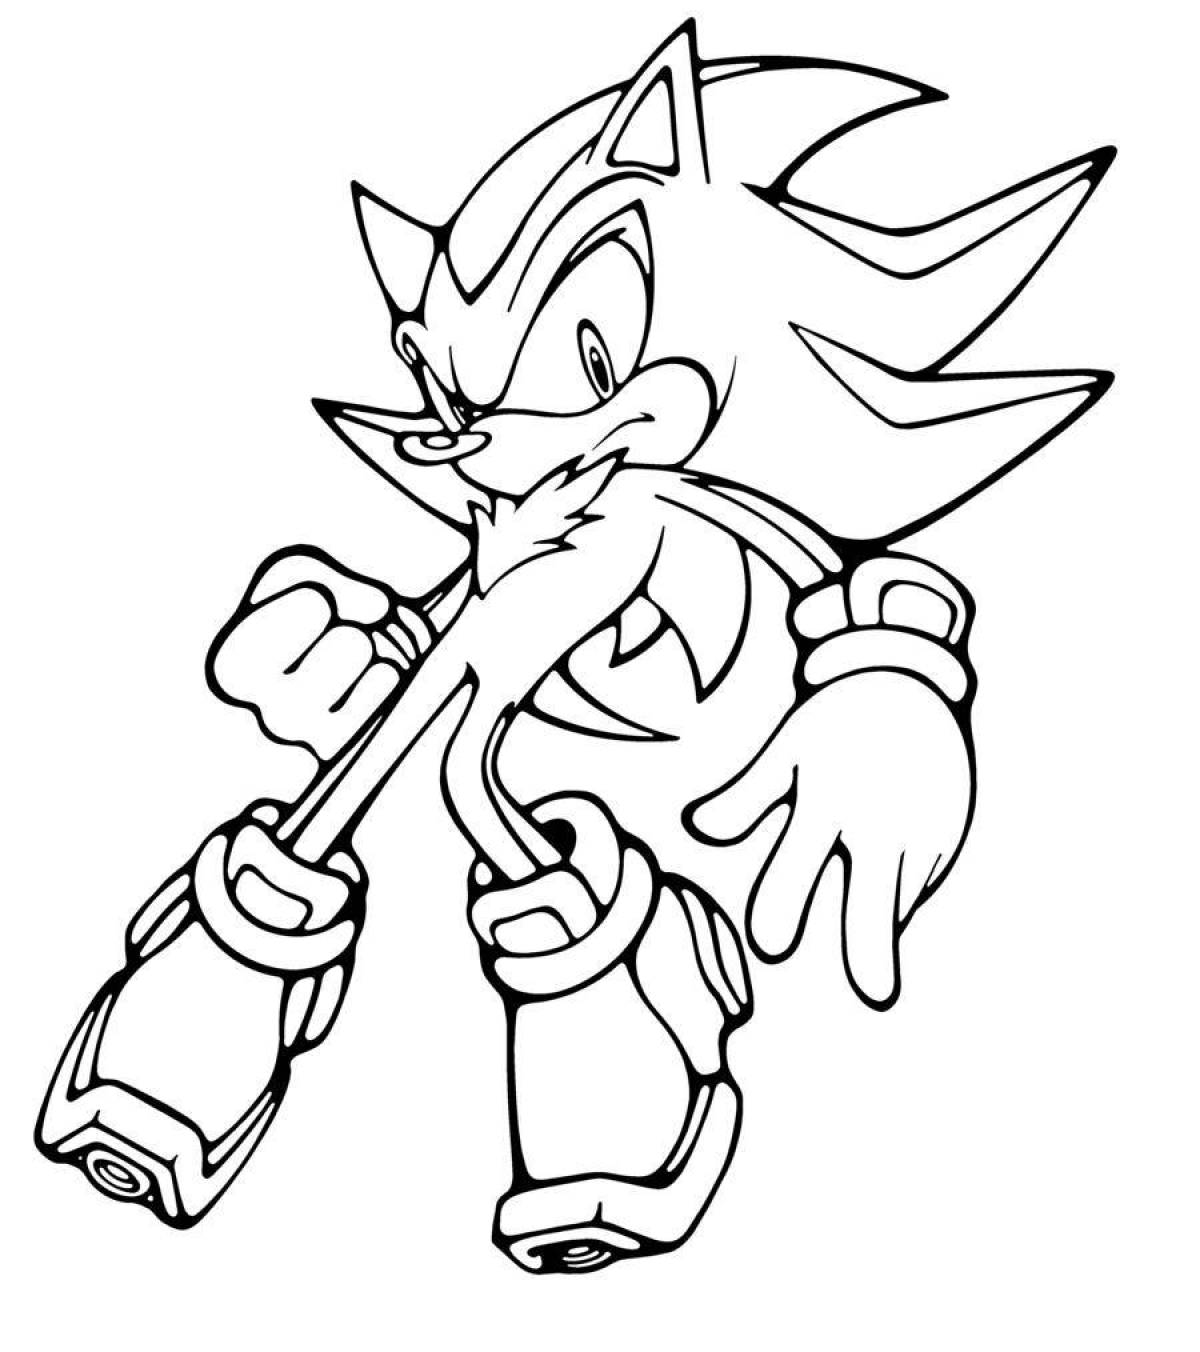 Sonic seal bright coloring